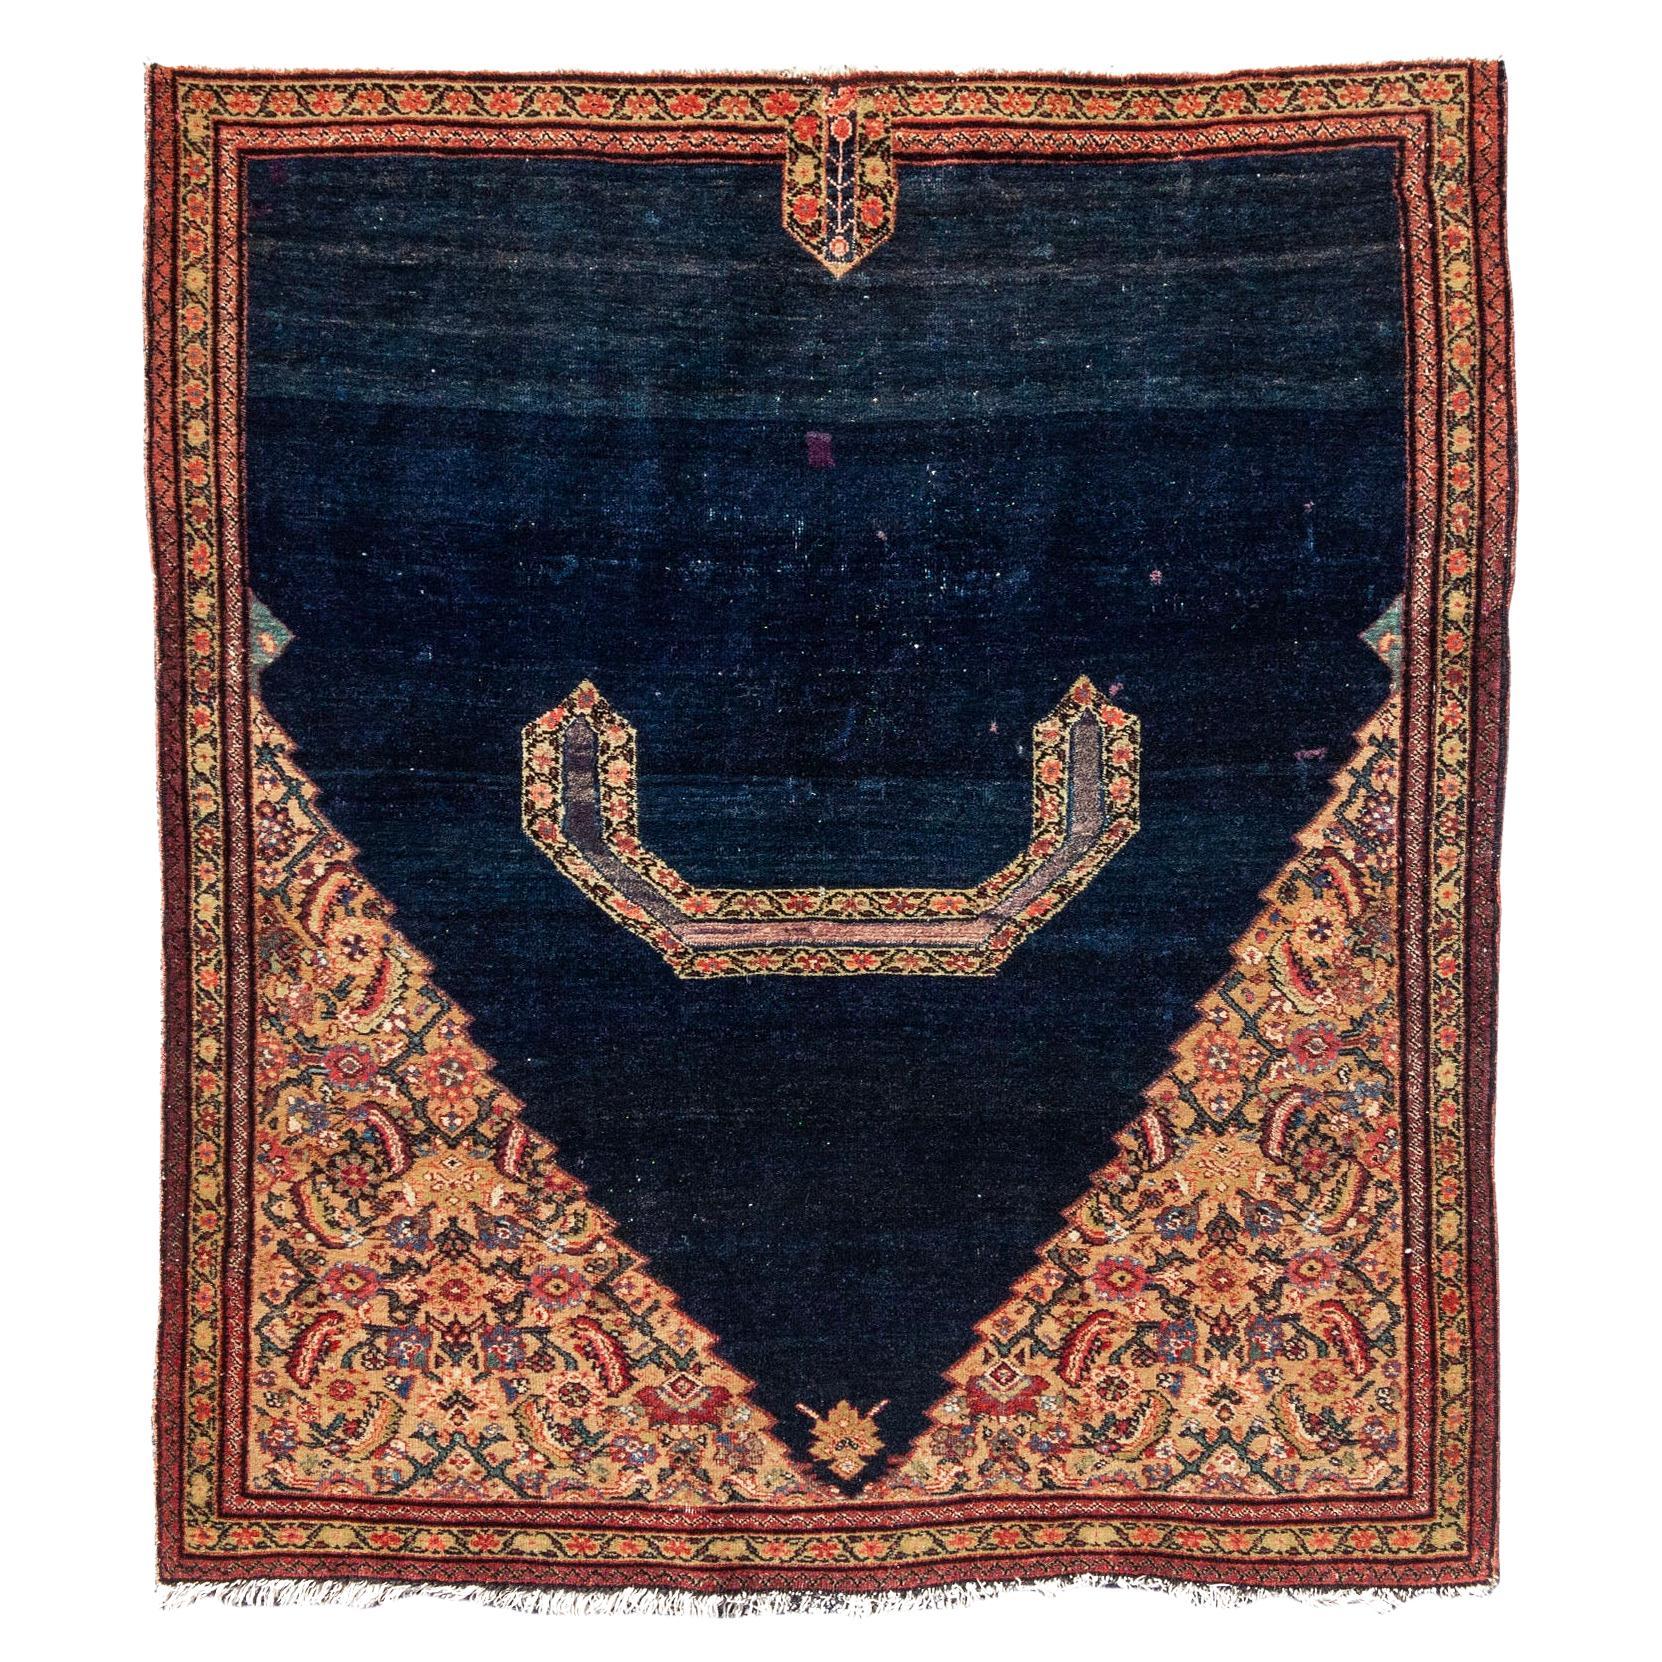 Antique Persian Fereghan Saddle Cover, Late 19th Century